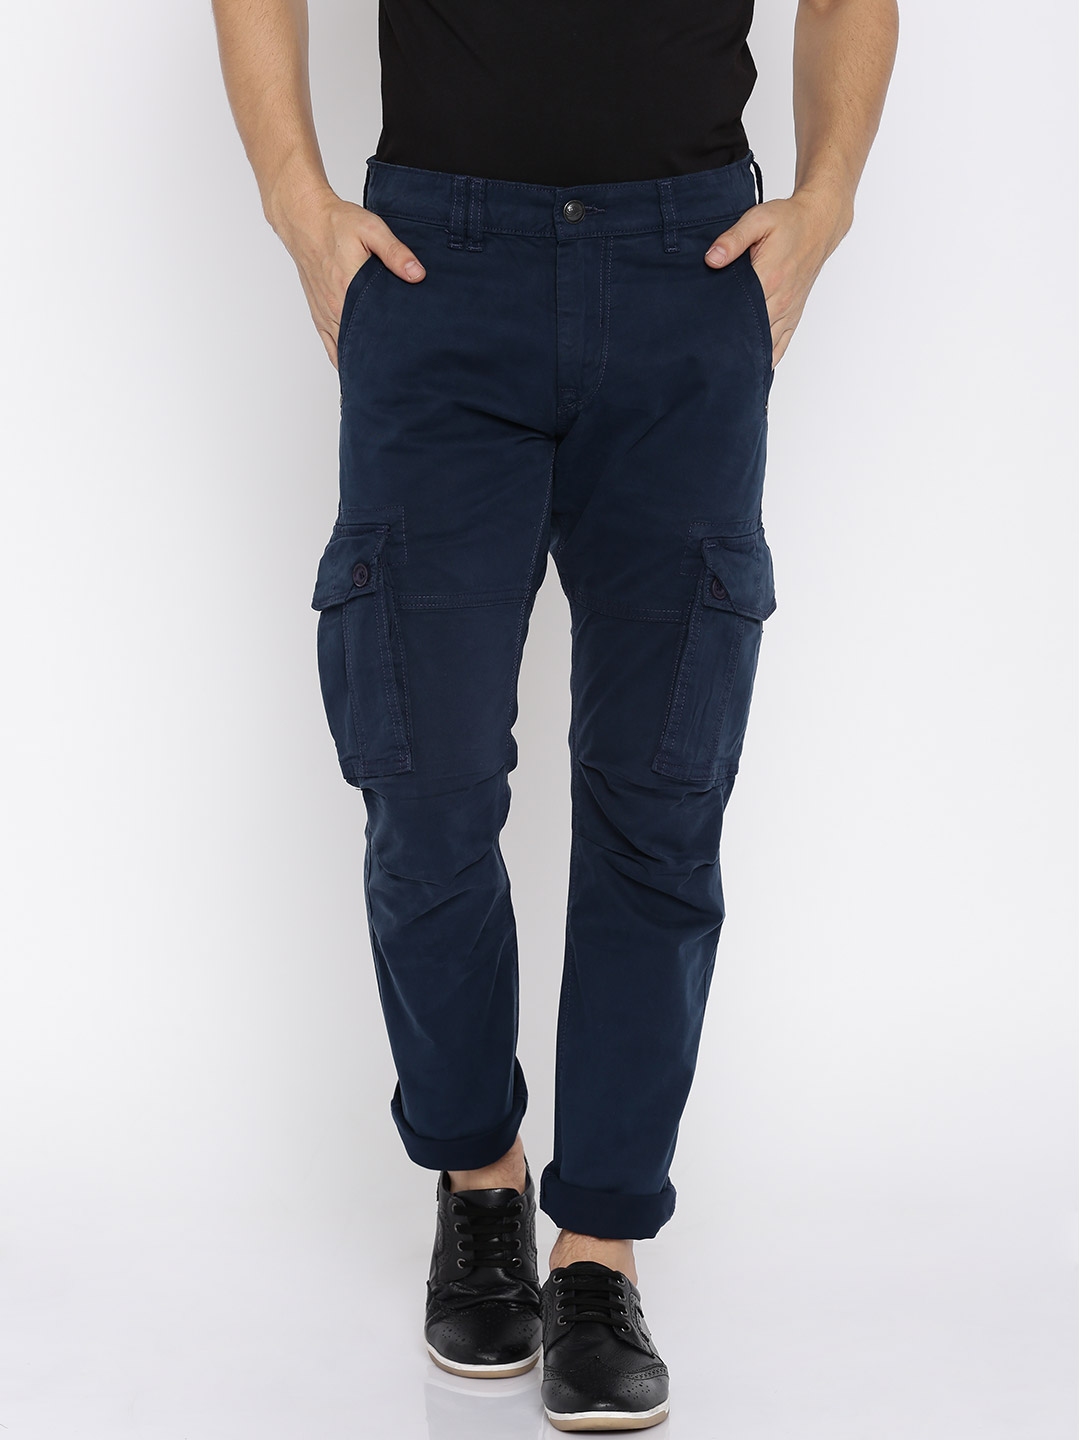 Buy Navy Blue Trousers  Pants for Men by The Indian Garage Co Online   Ajiocom